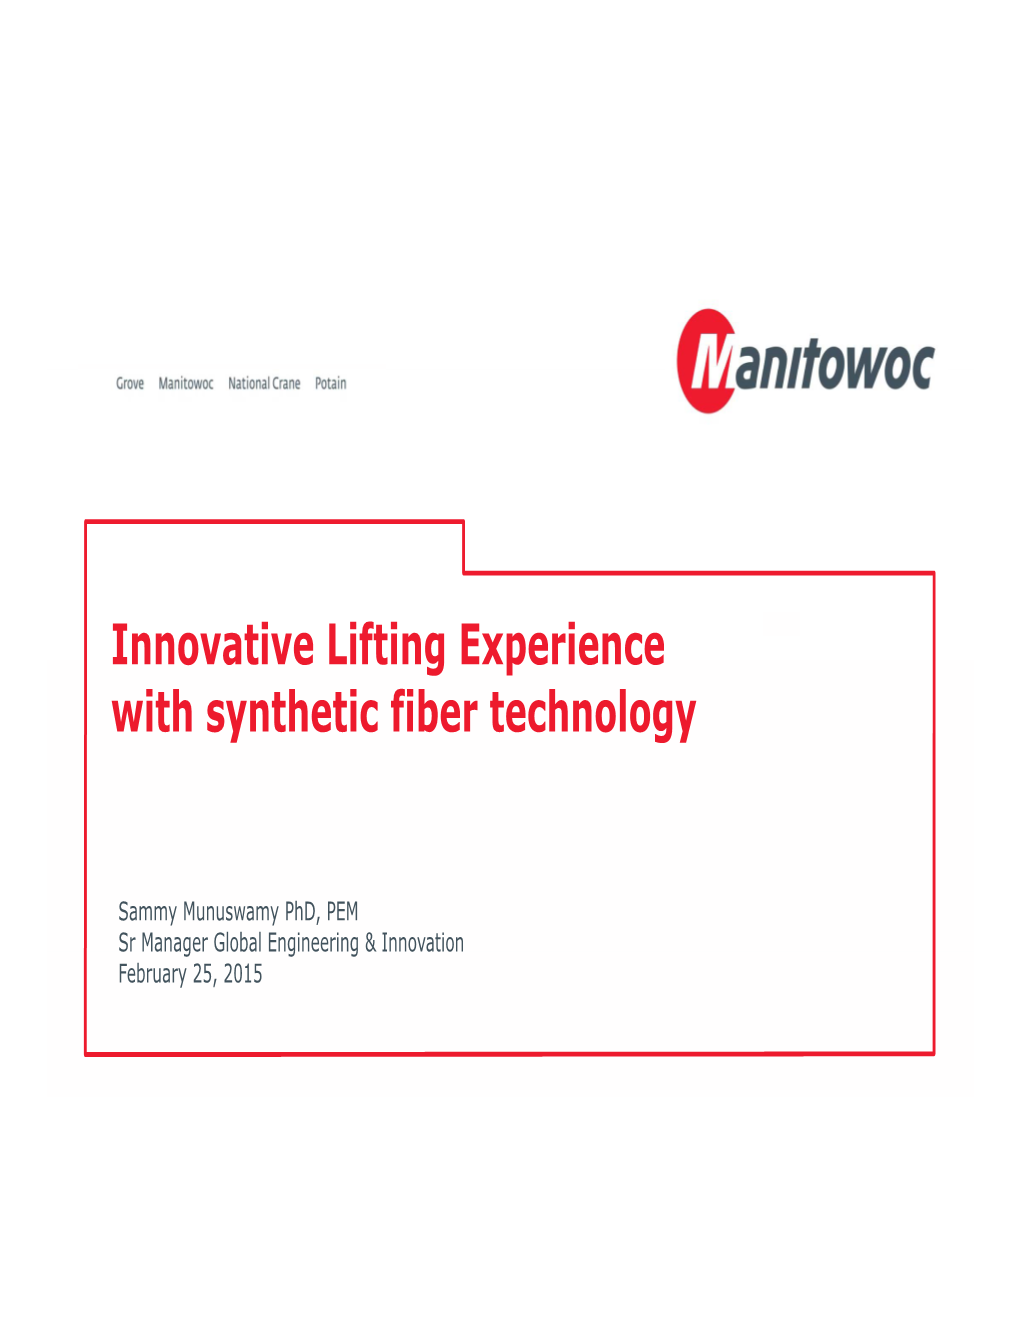 Innovative Lifting Experience with Synthetic Fiber Technology